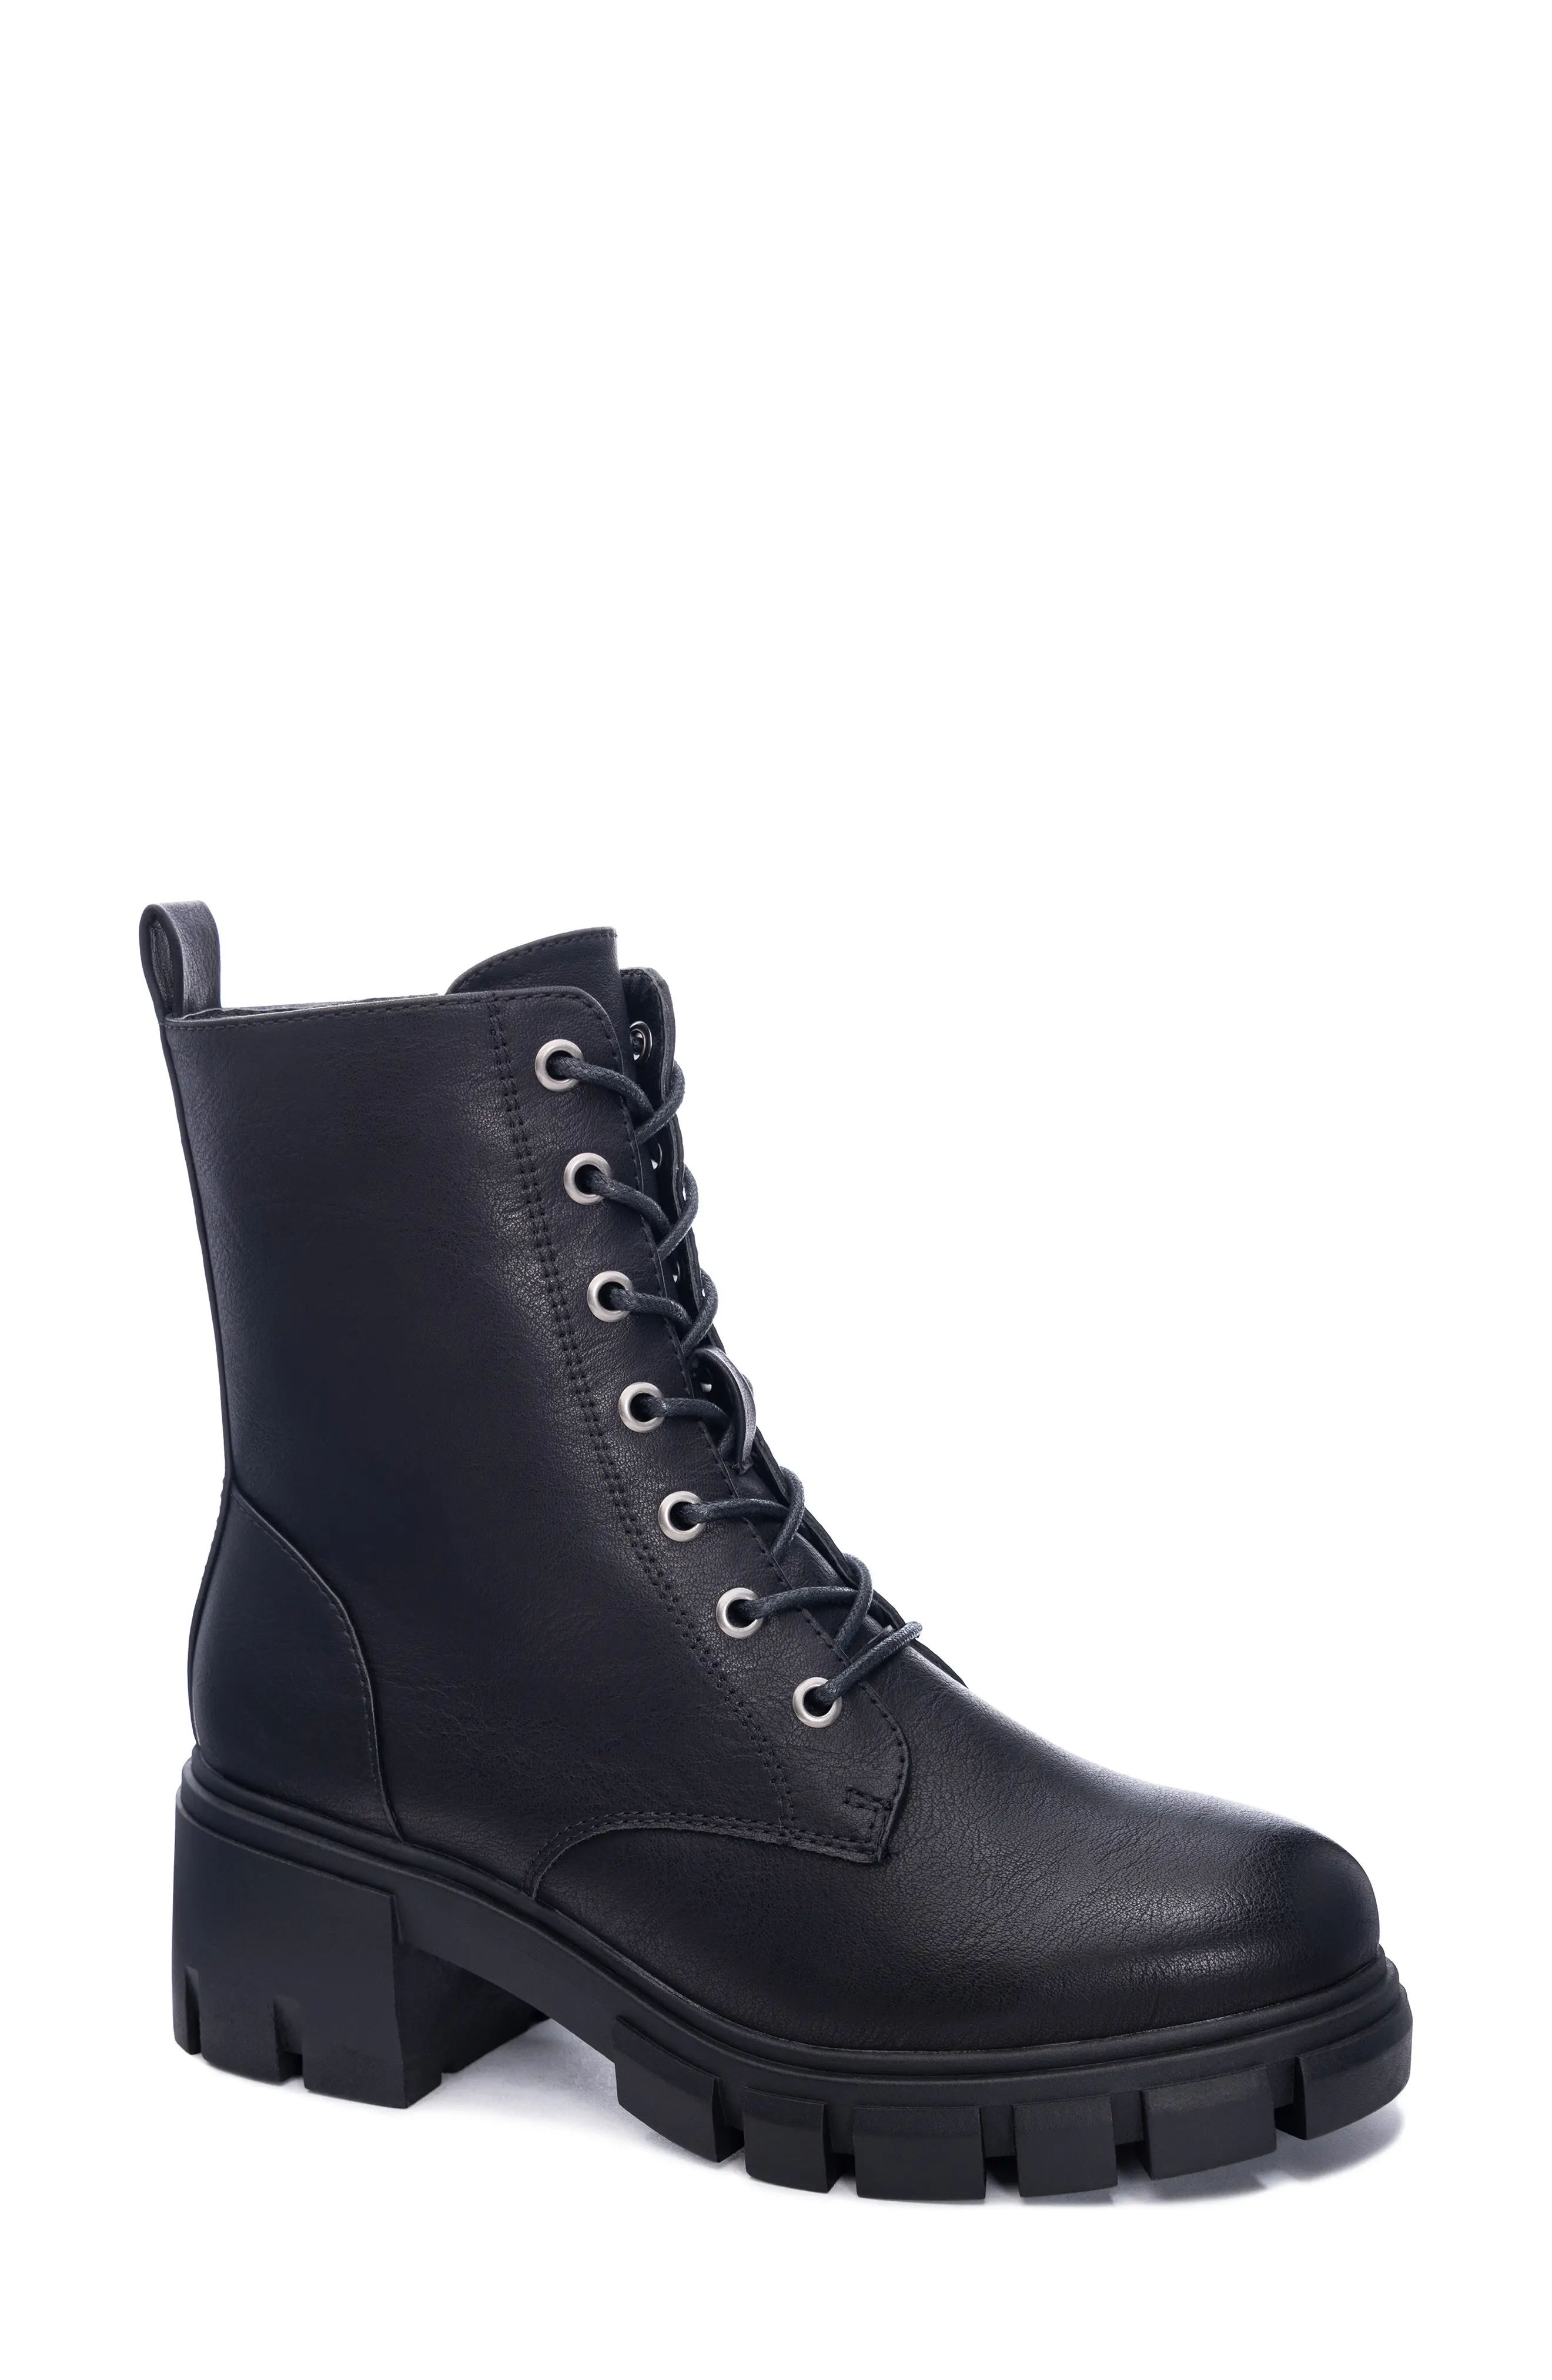 Dirty Laundry Newz Combat Boot in Black Smooth at Nordstrom, Size 9.5 | Nordstrom